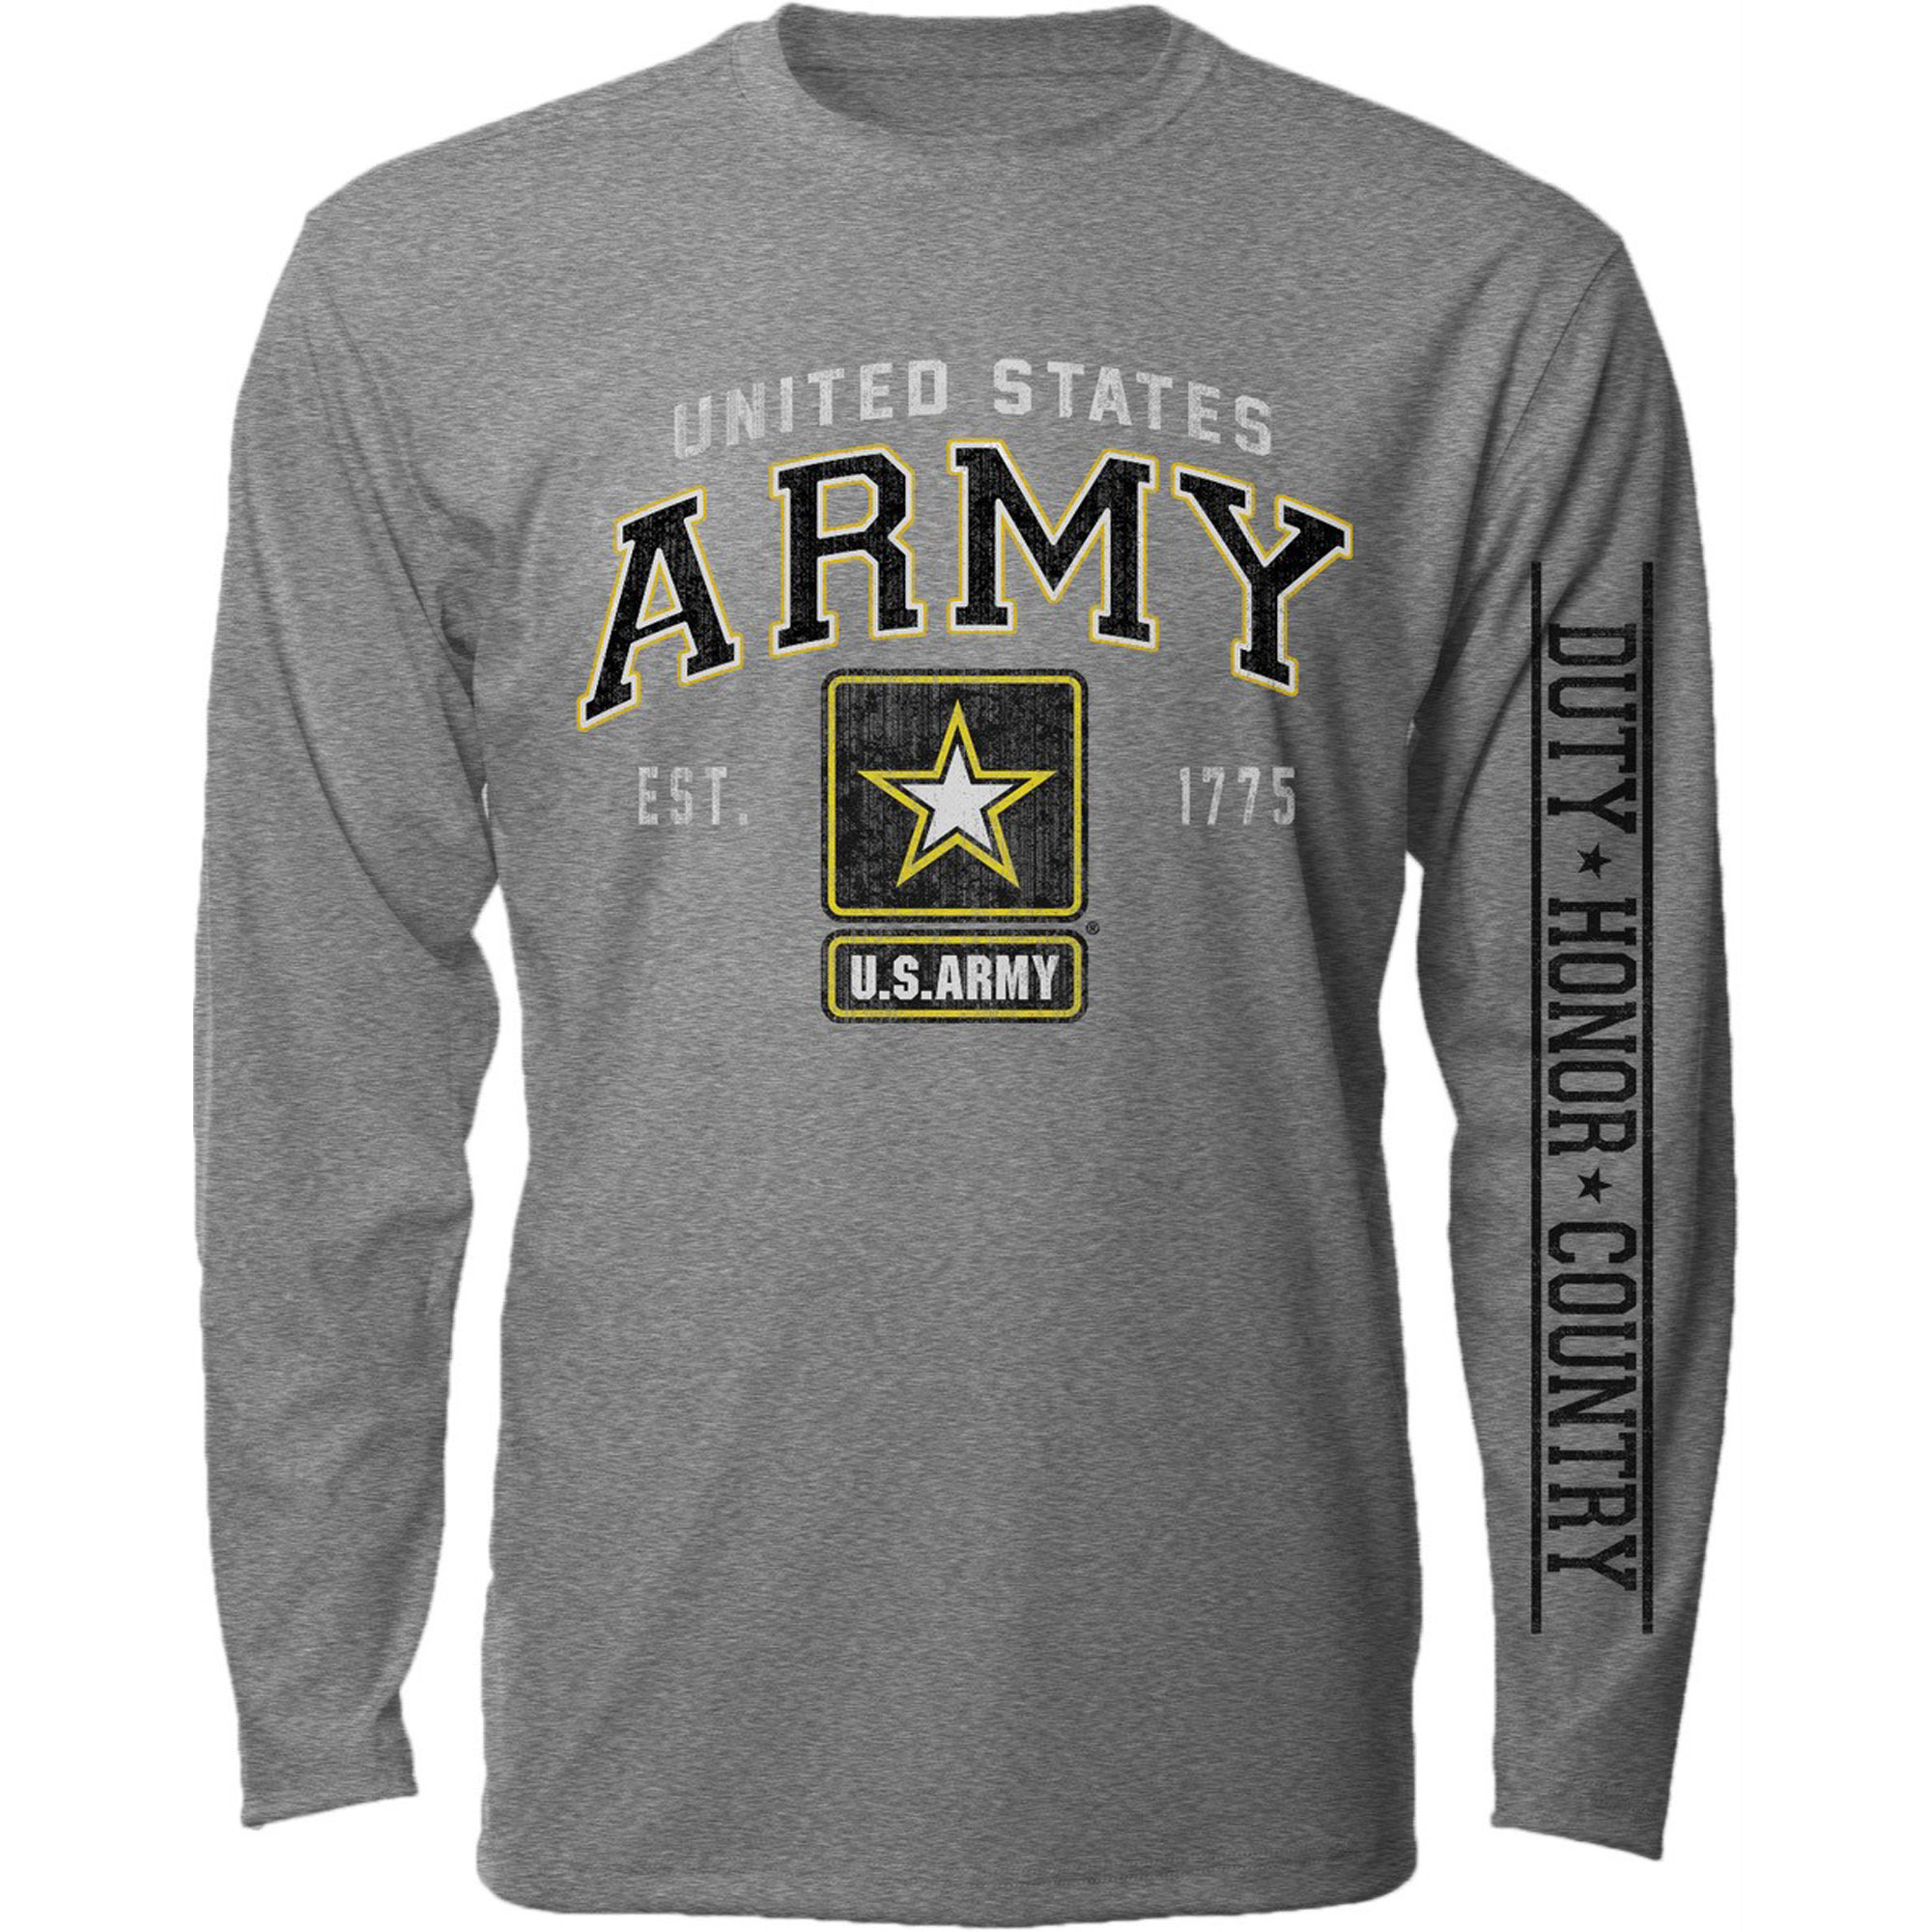 If You Arent Going To Stand Behind Our Troops Military USA Long Sleeve Tee 